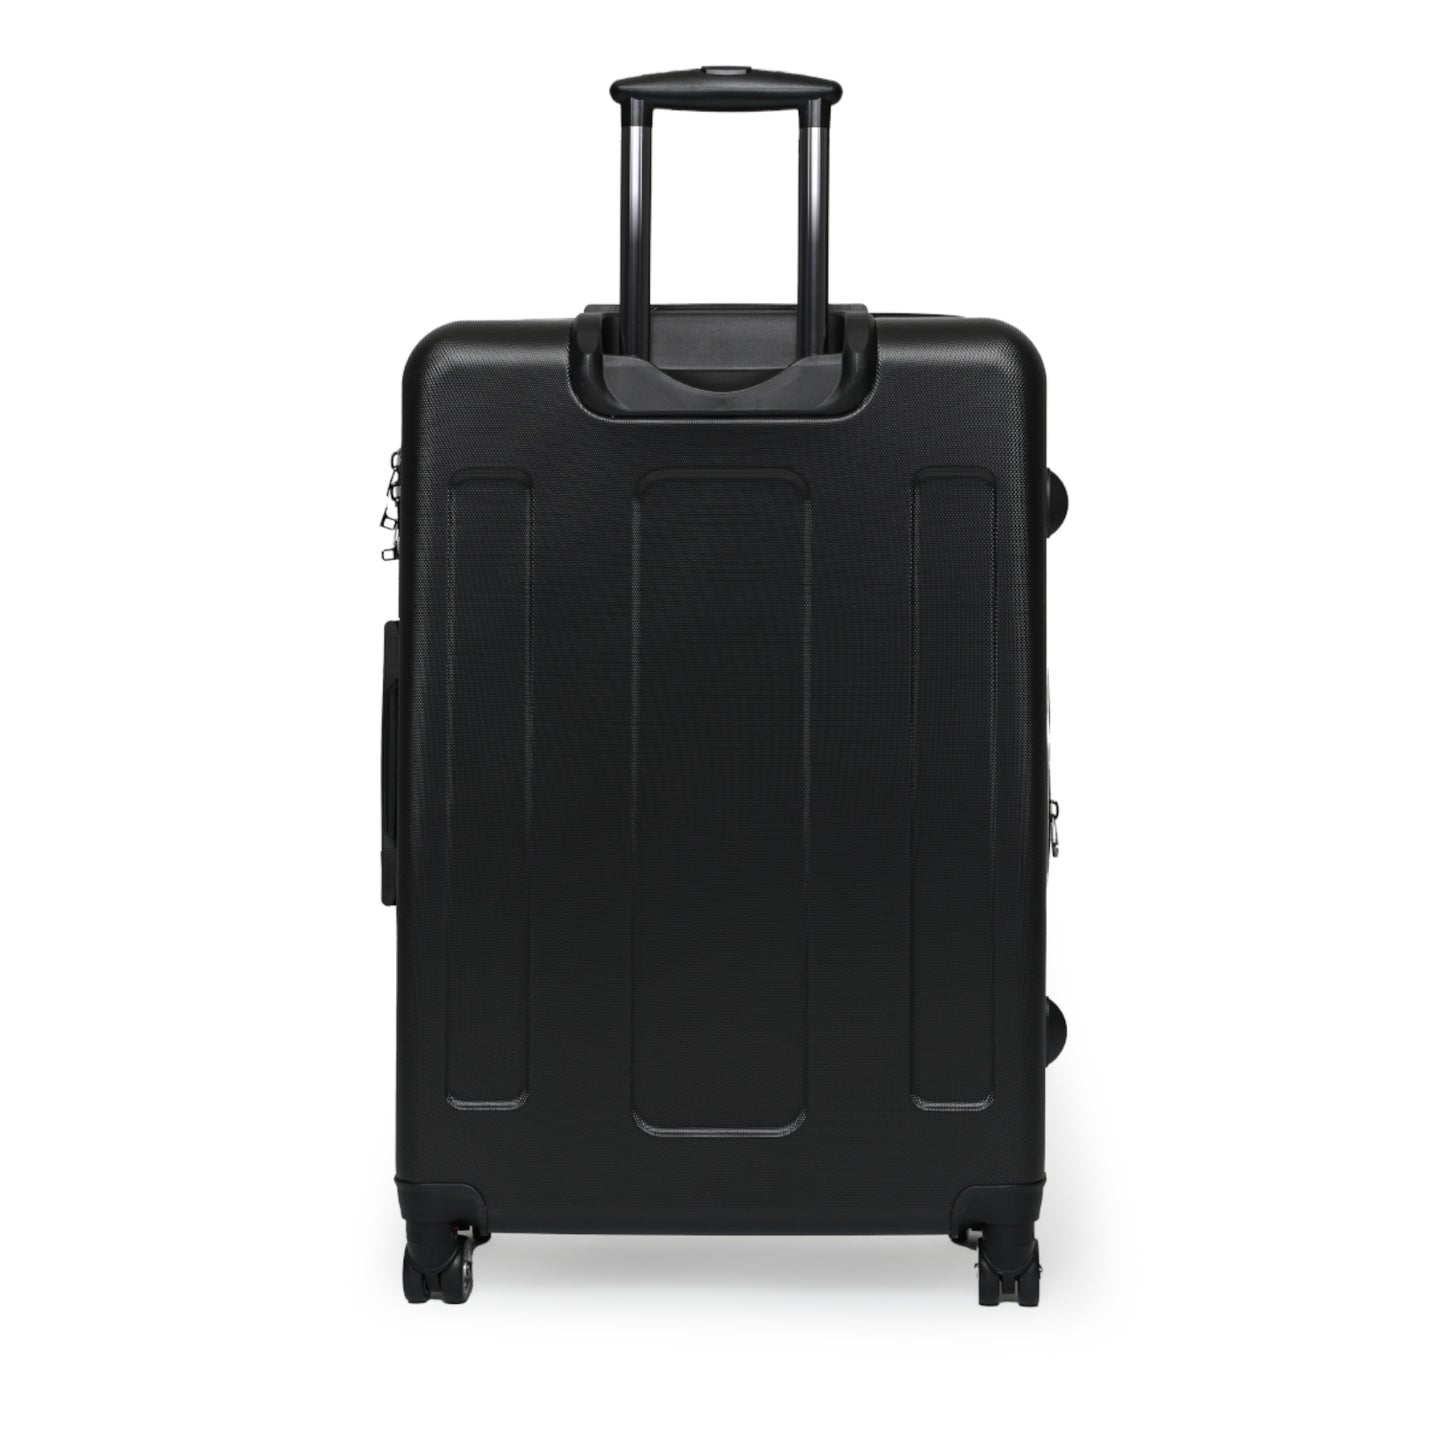 DH FLIGHT Luggage in TIMBER (Small, Medium & Large)